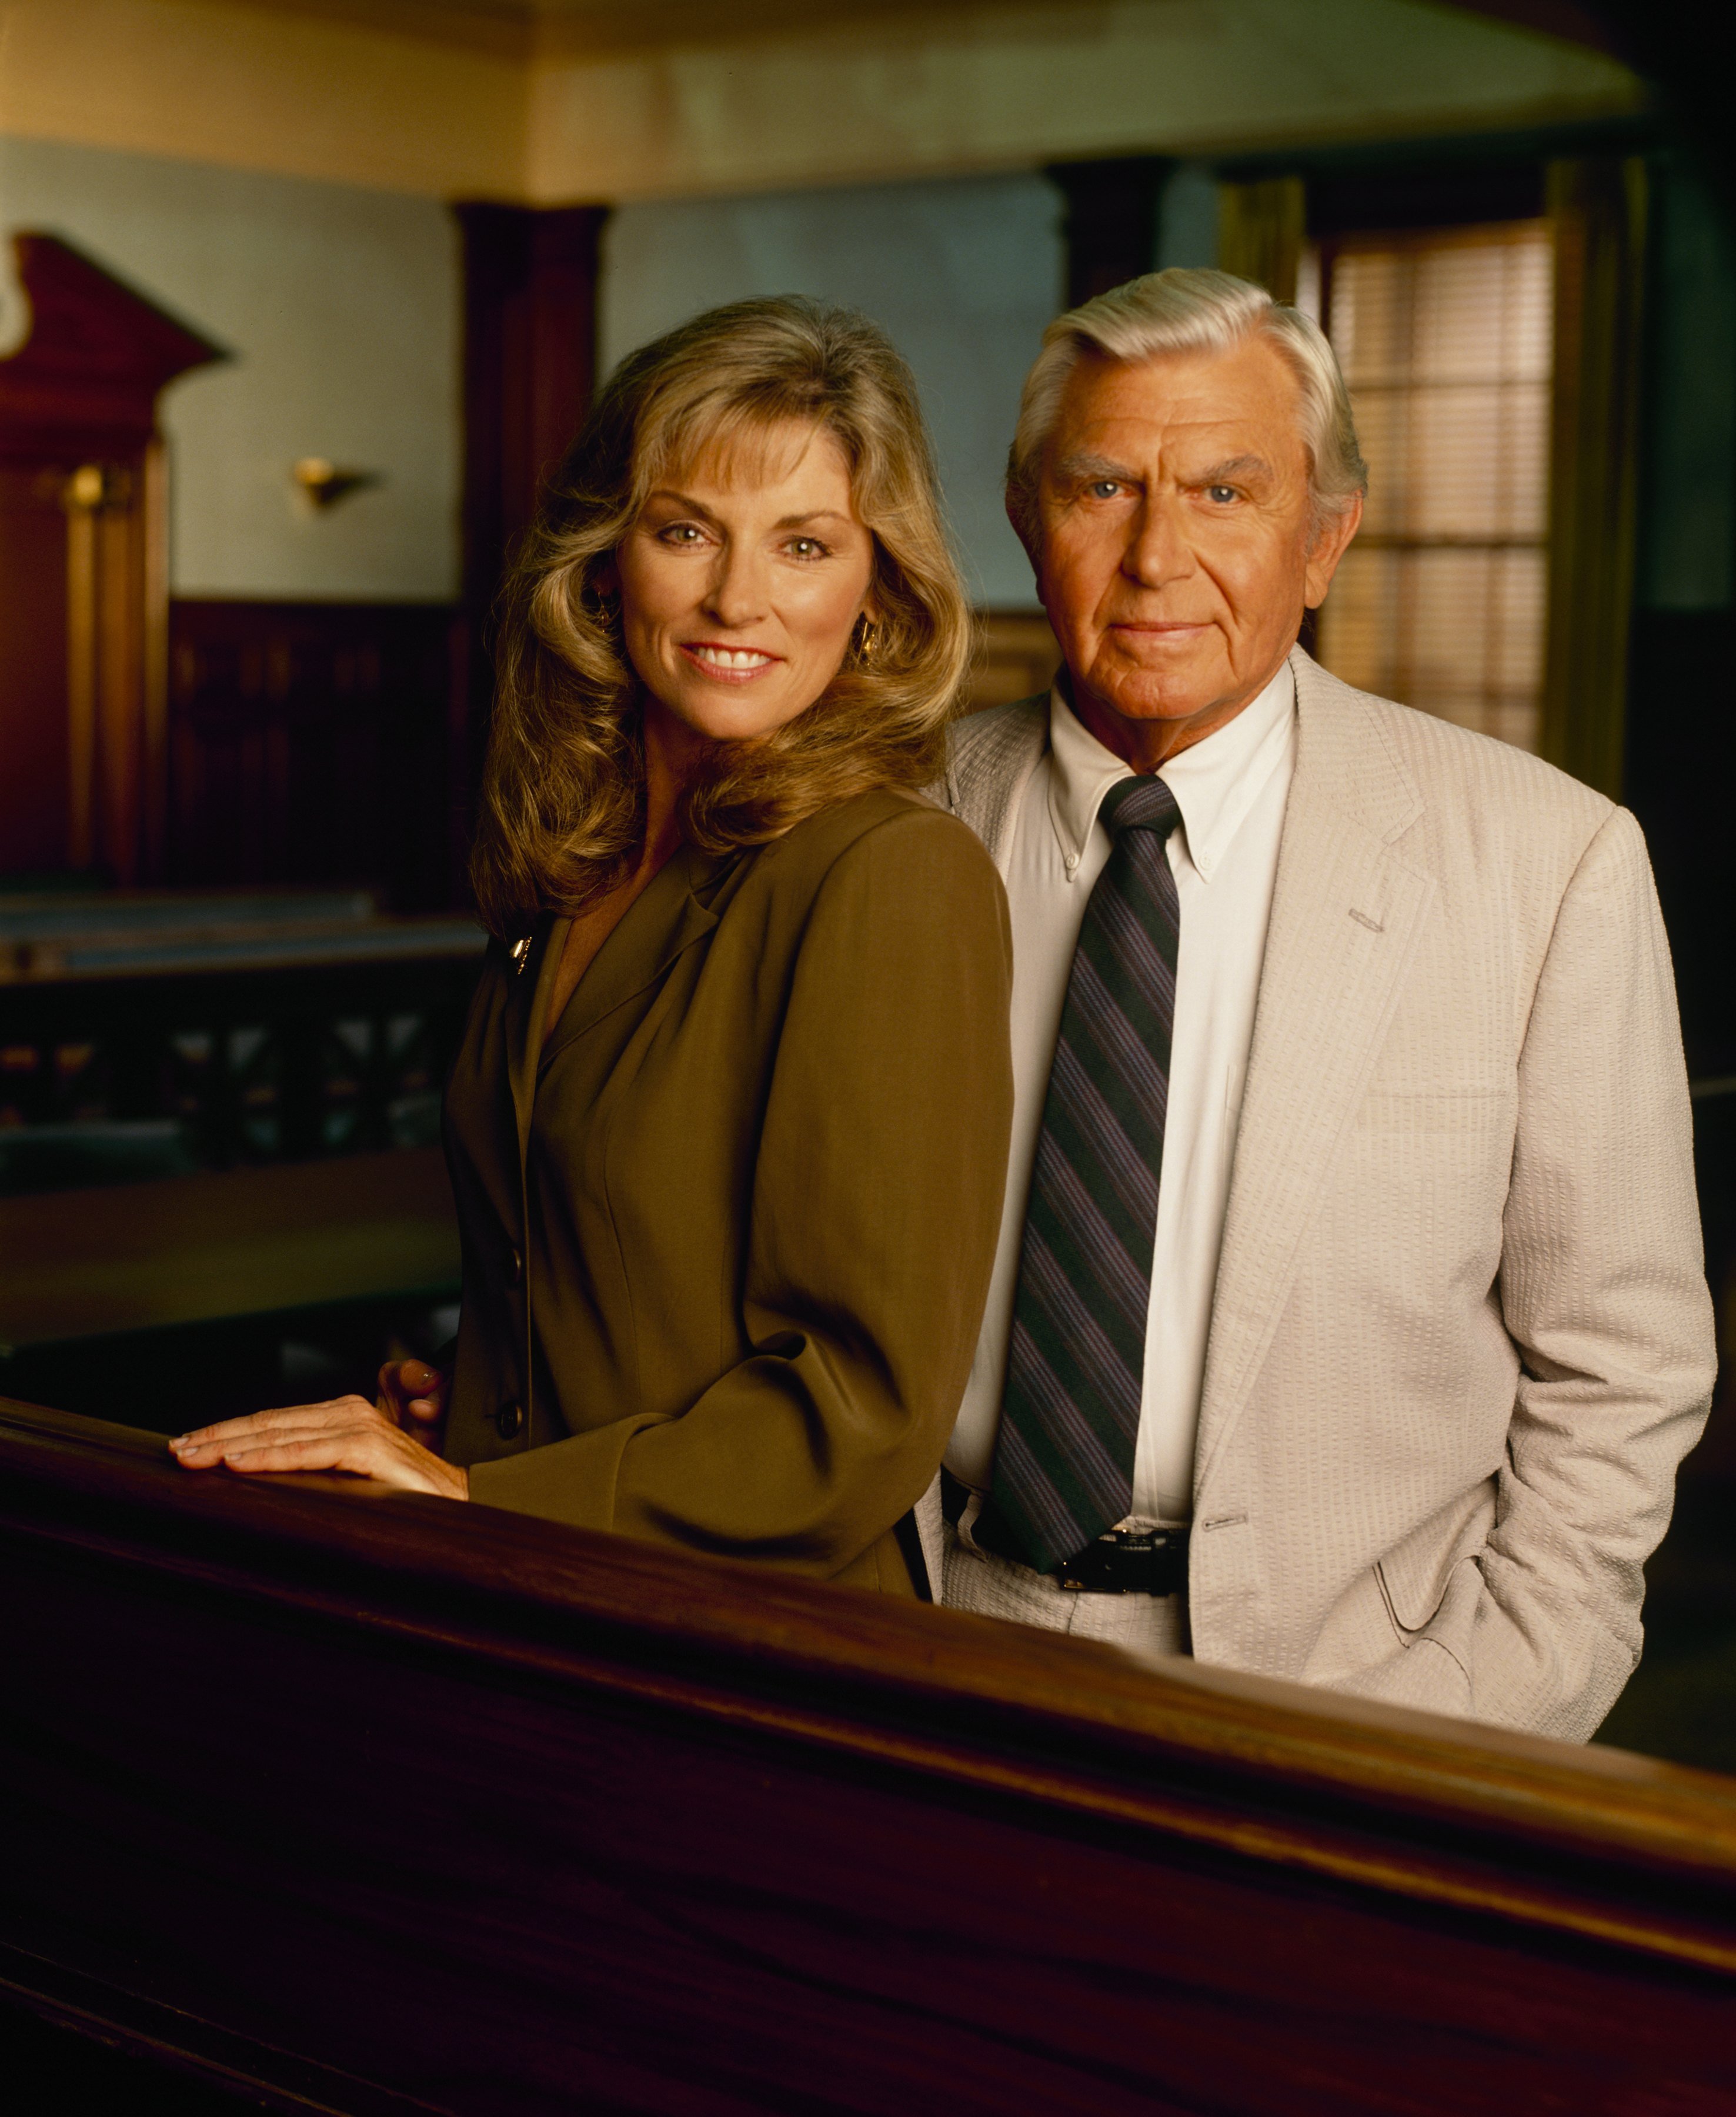 Brynn Thayer as Ben Matlock's daughter Leanne McIntyre, left, and Andy Griffith as Ben Matlock pose for a photo, 1993